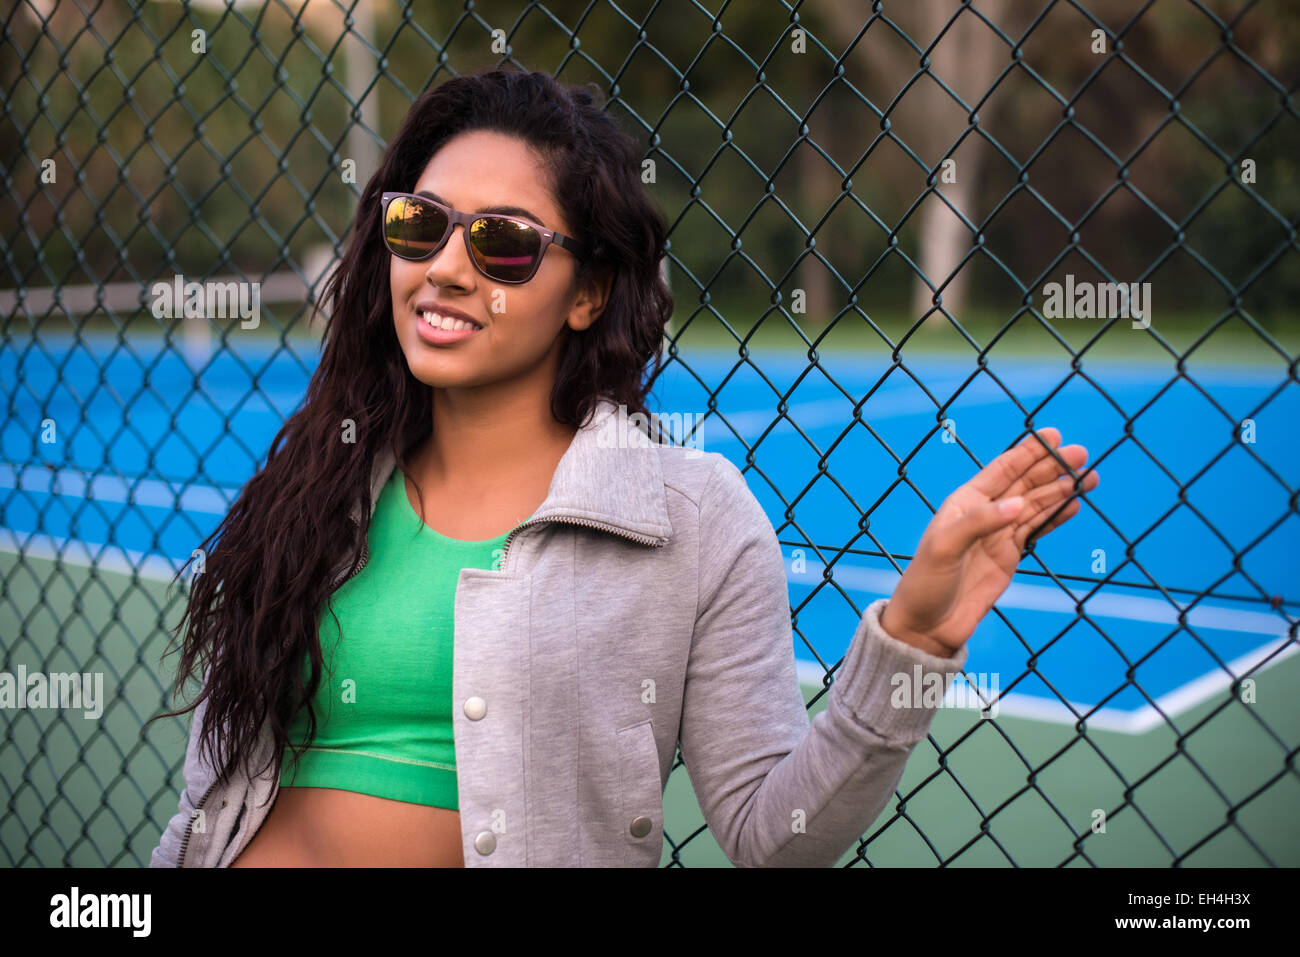 Woman wearing sunglasses over tennis court background Stock Photo